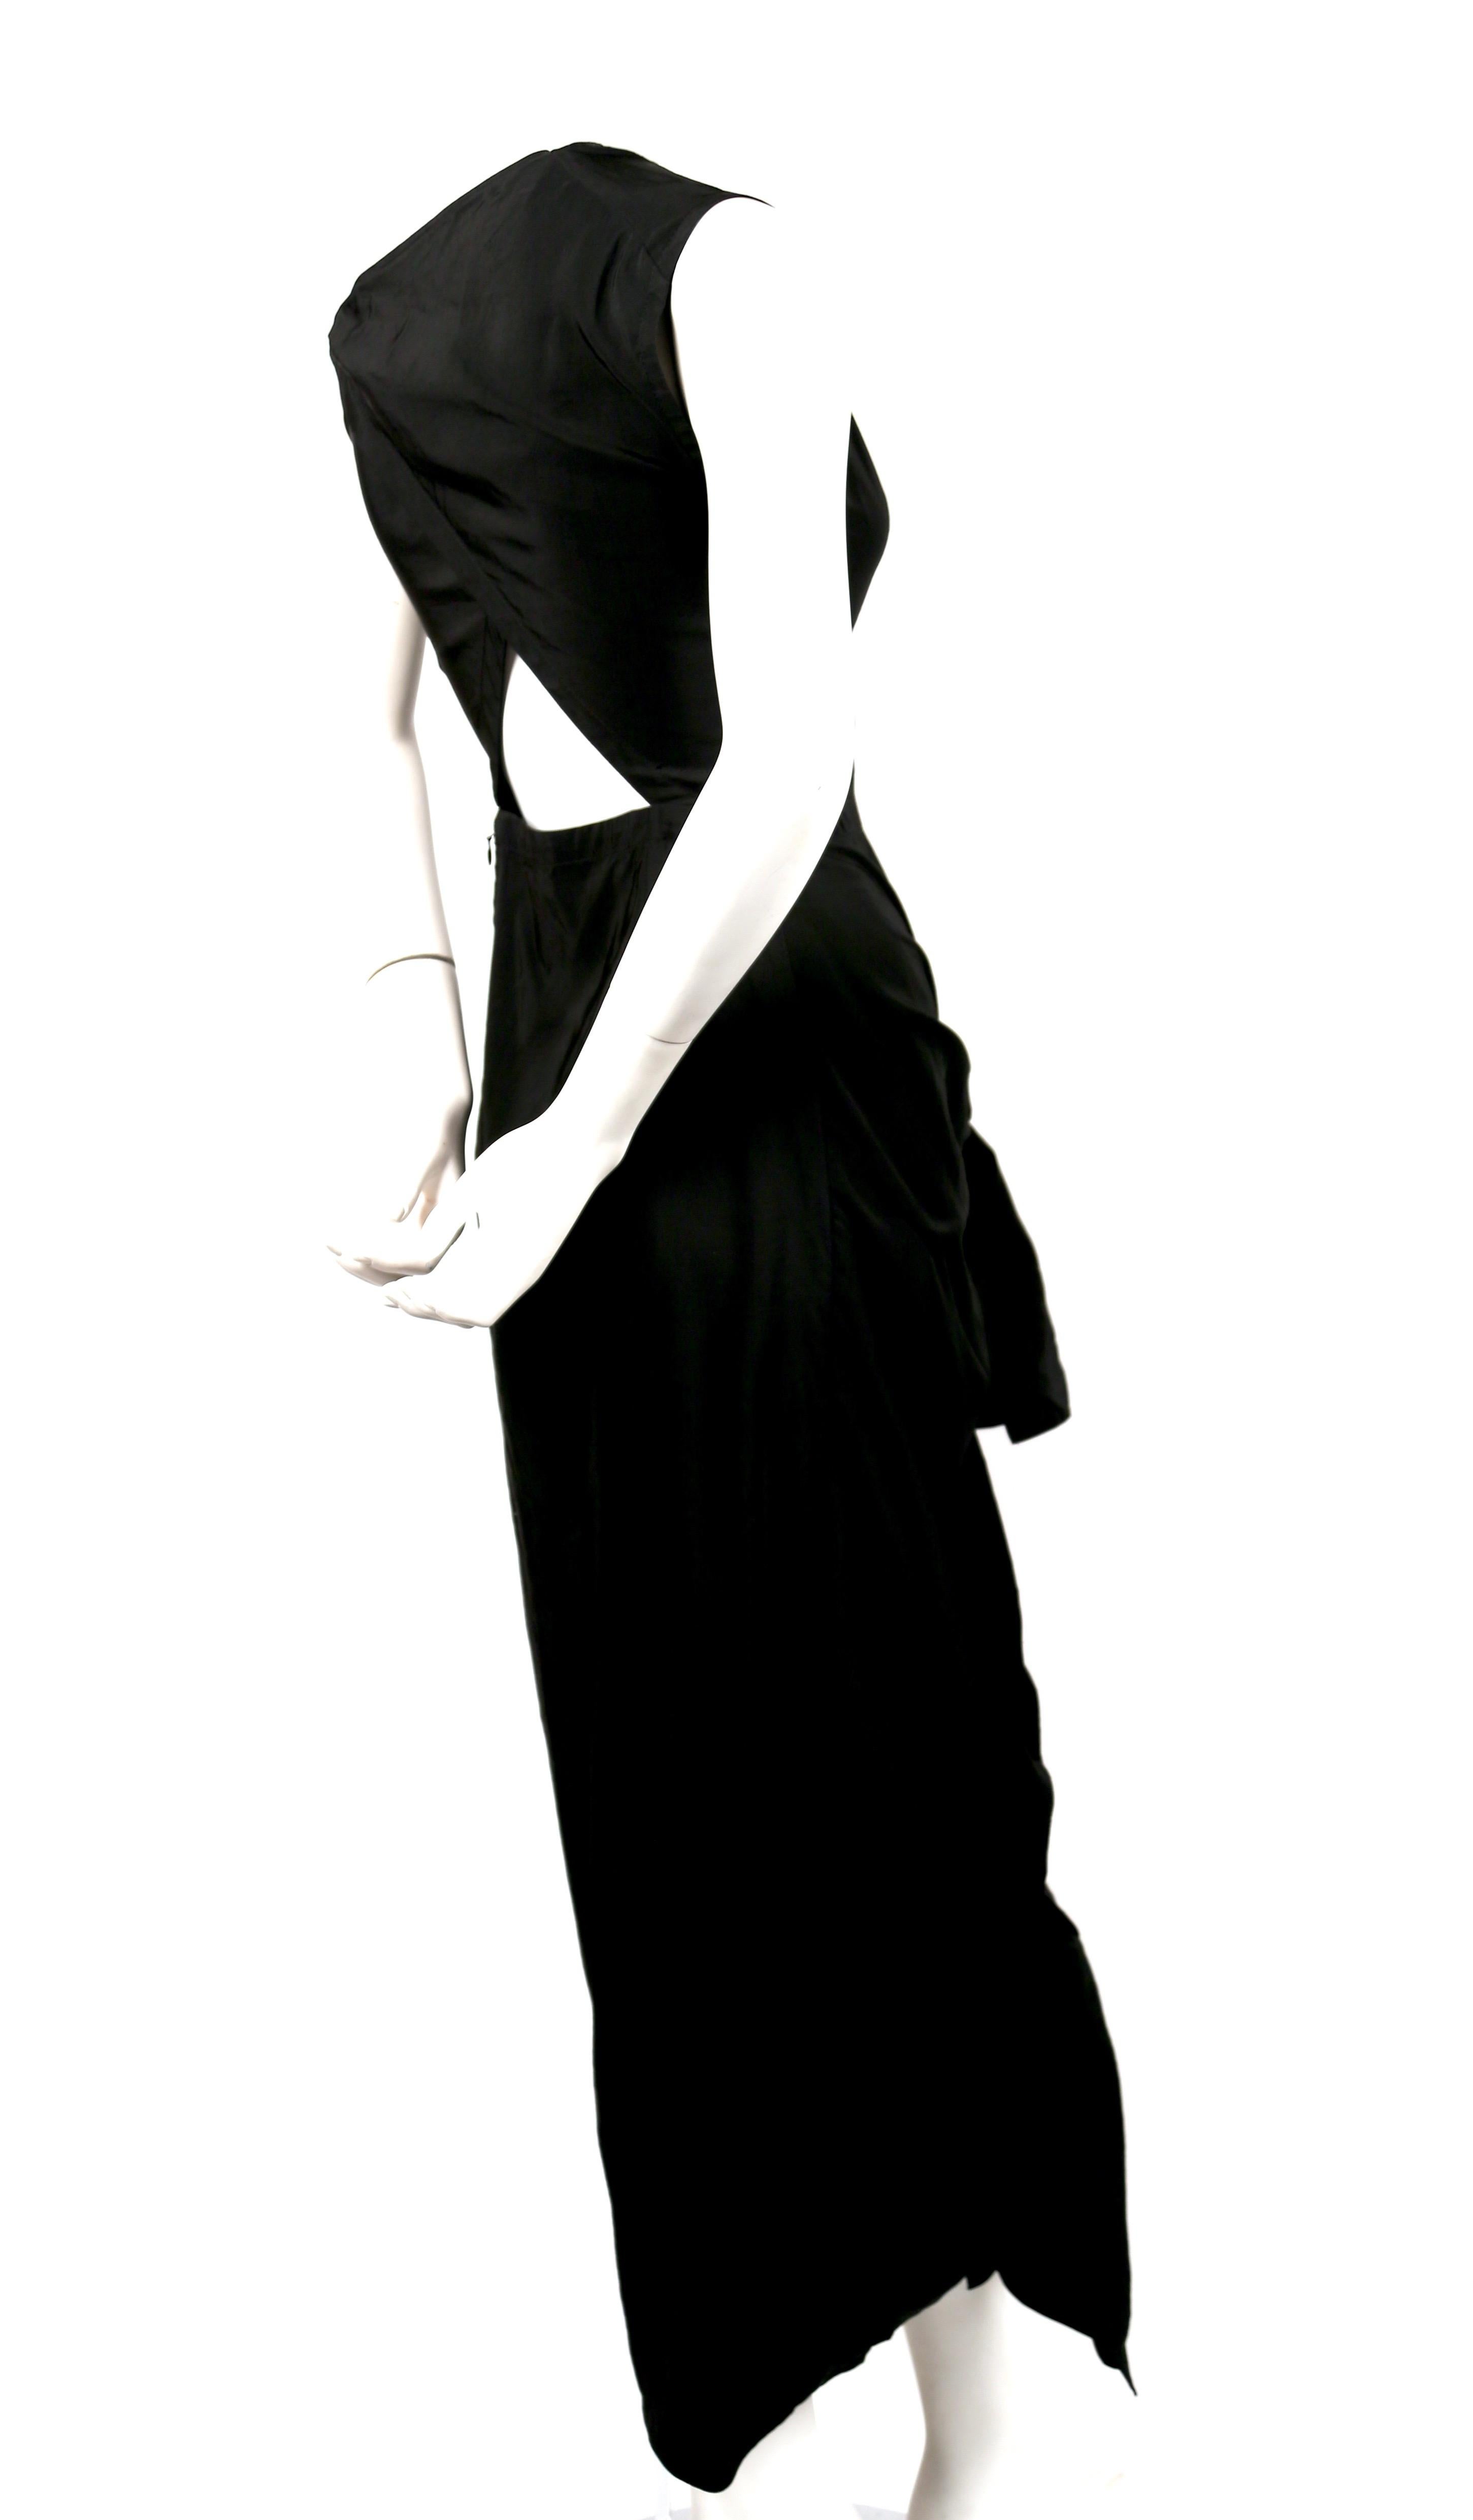 Black Celine By Phoebe Philo black dress with ties and cut out back